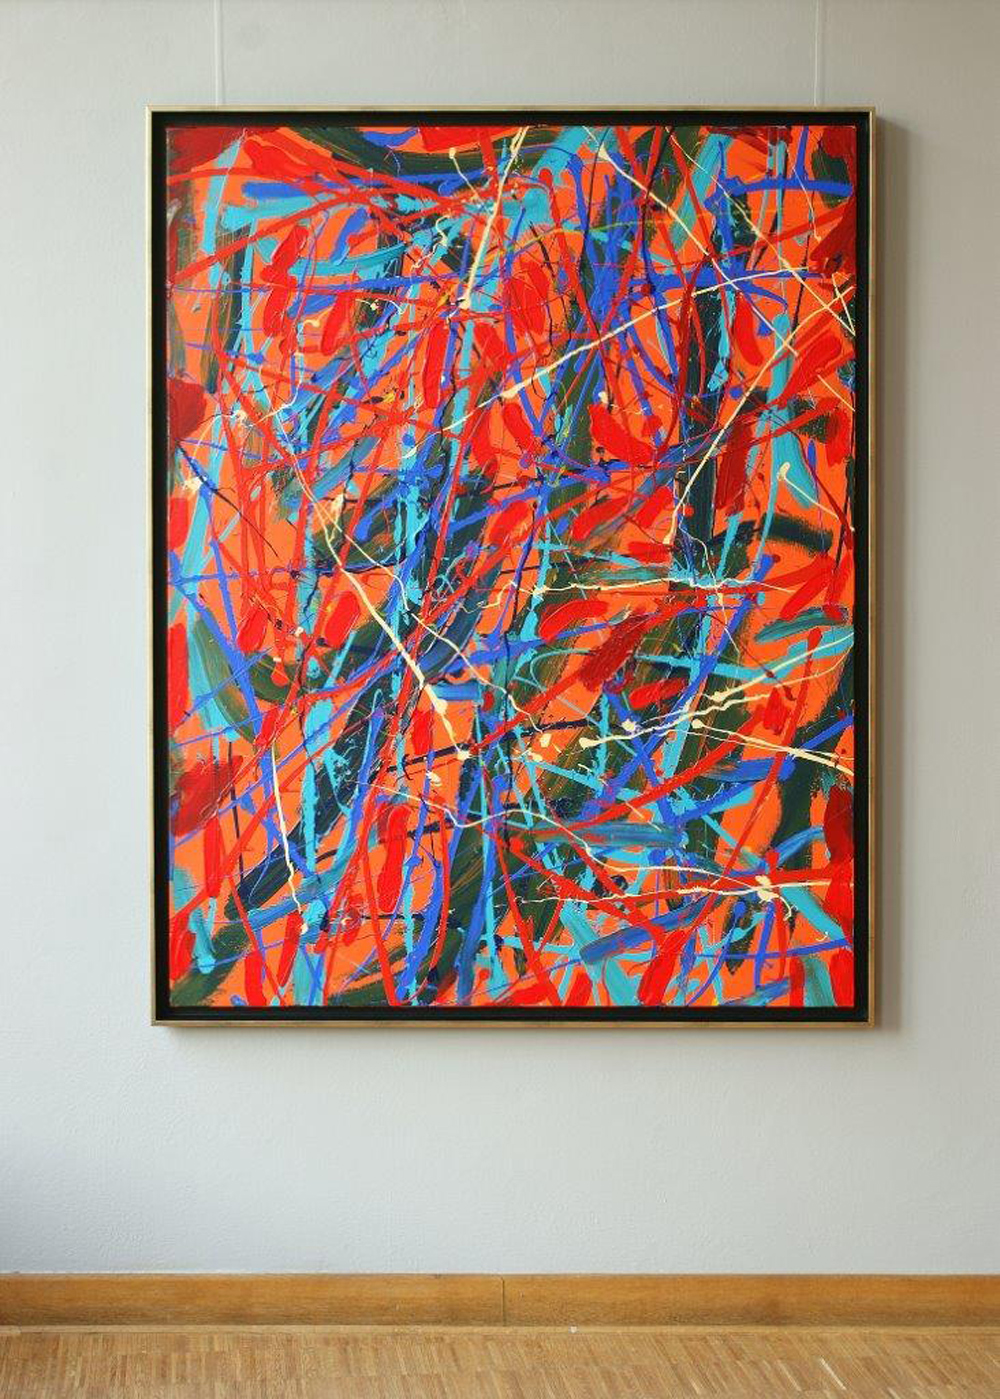 Edward Dwurnik - Abstract painting No 371 (Oil on Canvas | Size: 120 x 152 cm | Price: 28000 PLN)